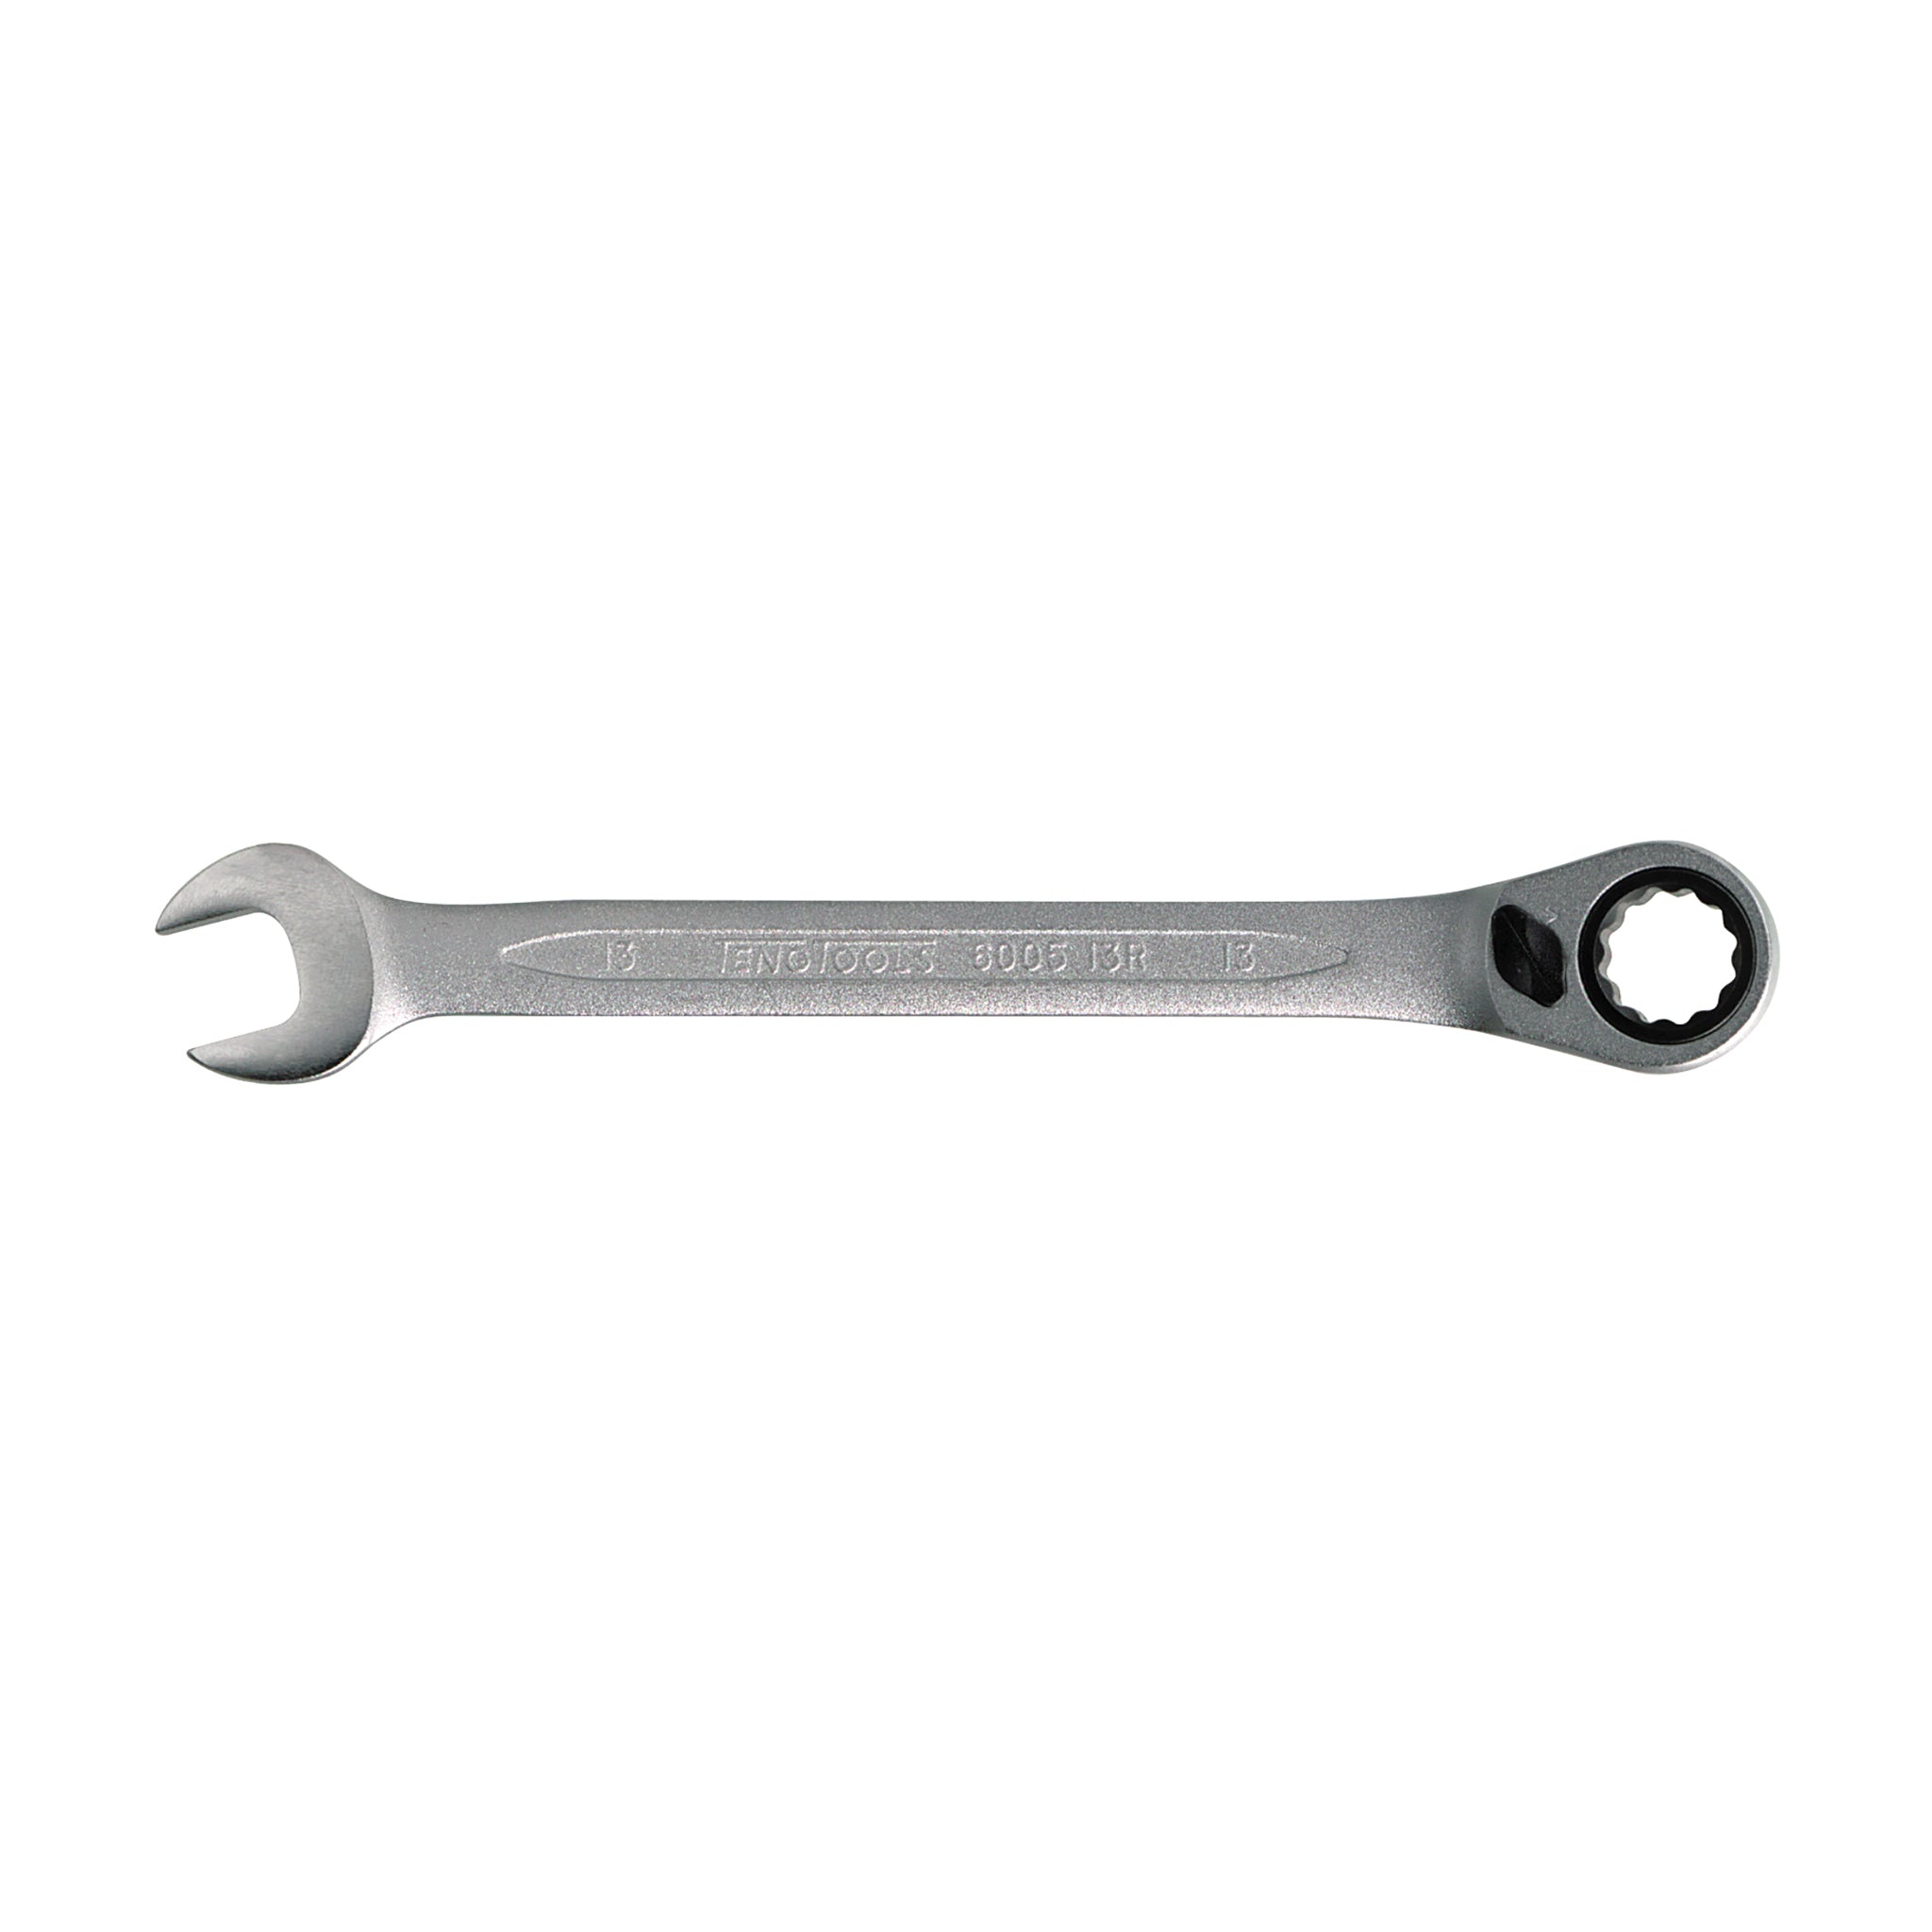 72 Teeth Ratchet Combination Metric Wrenches With Flip Reverse Lever - 14mm